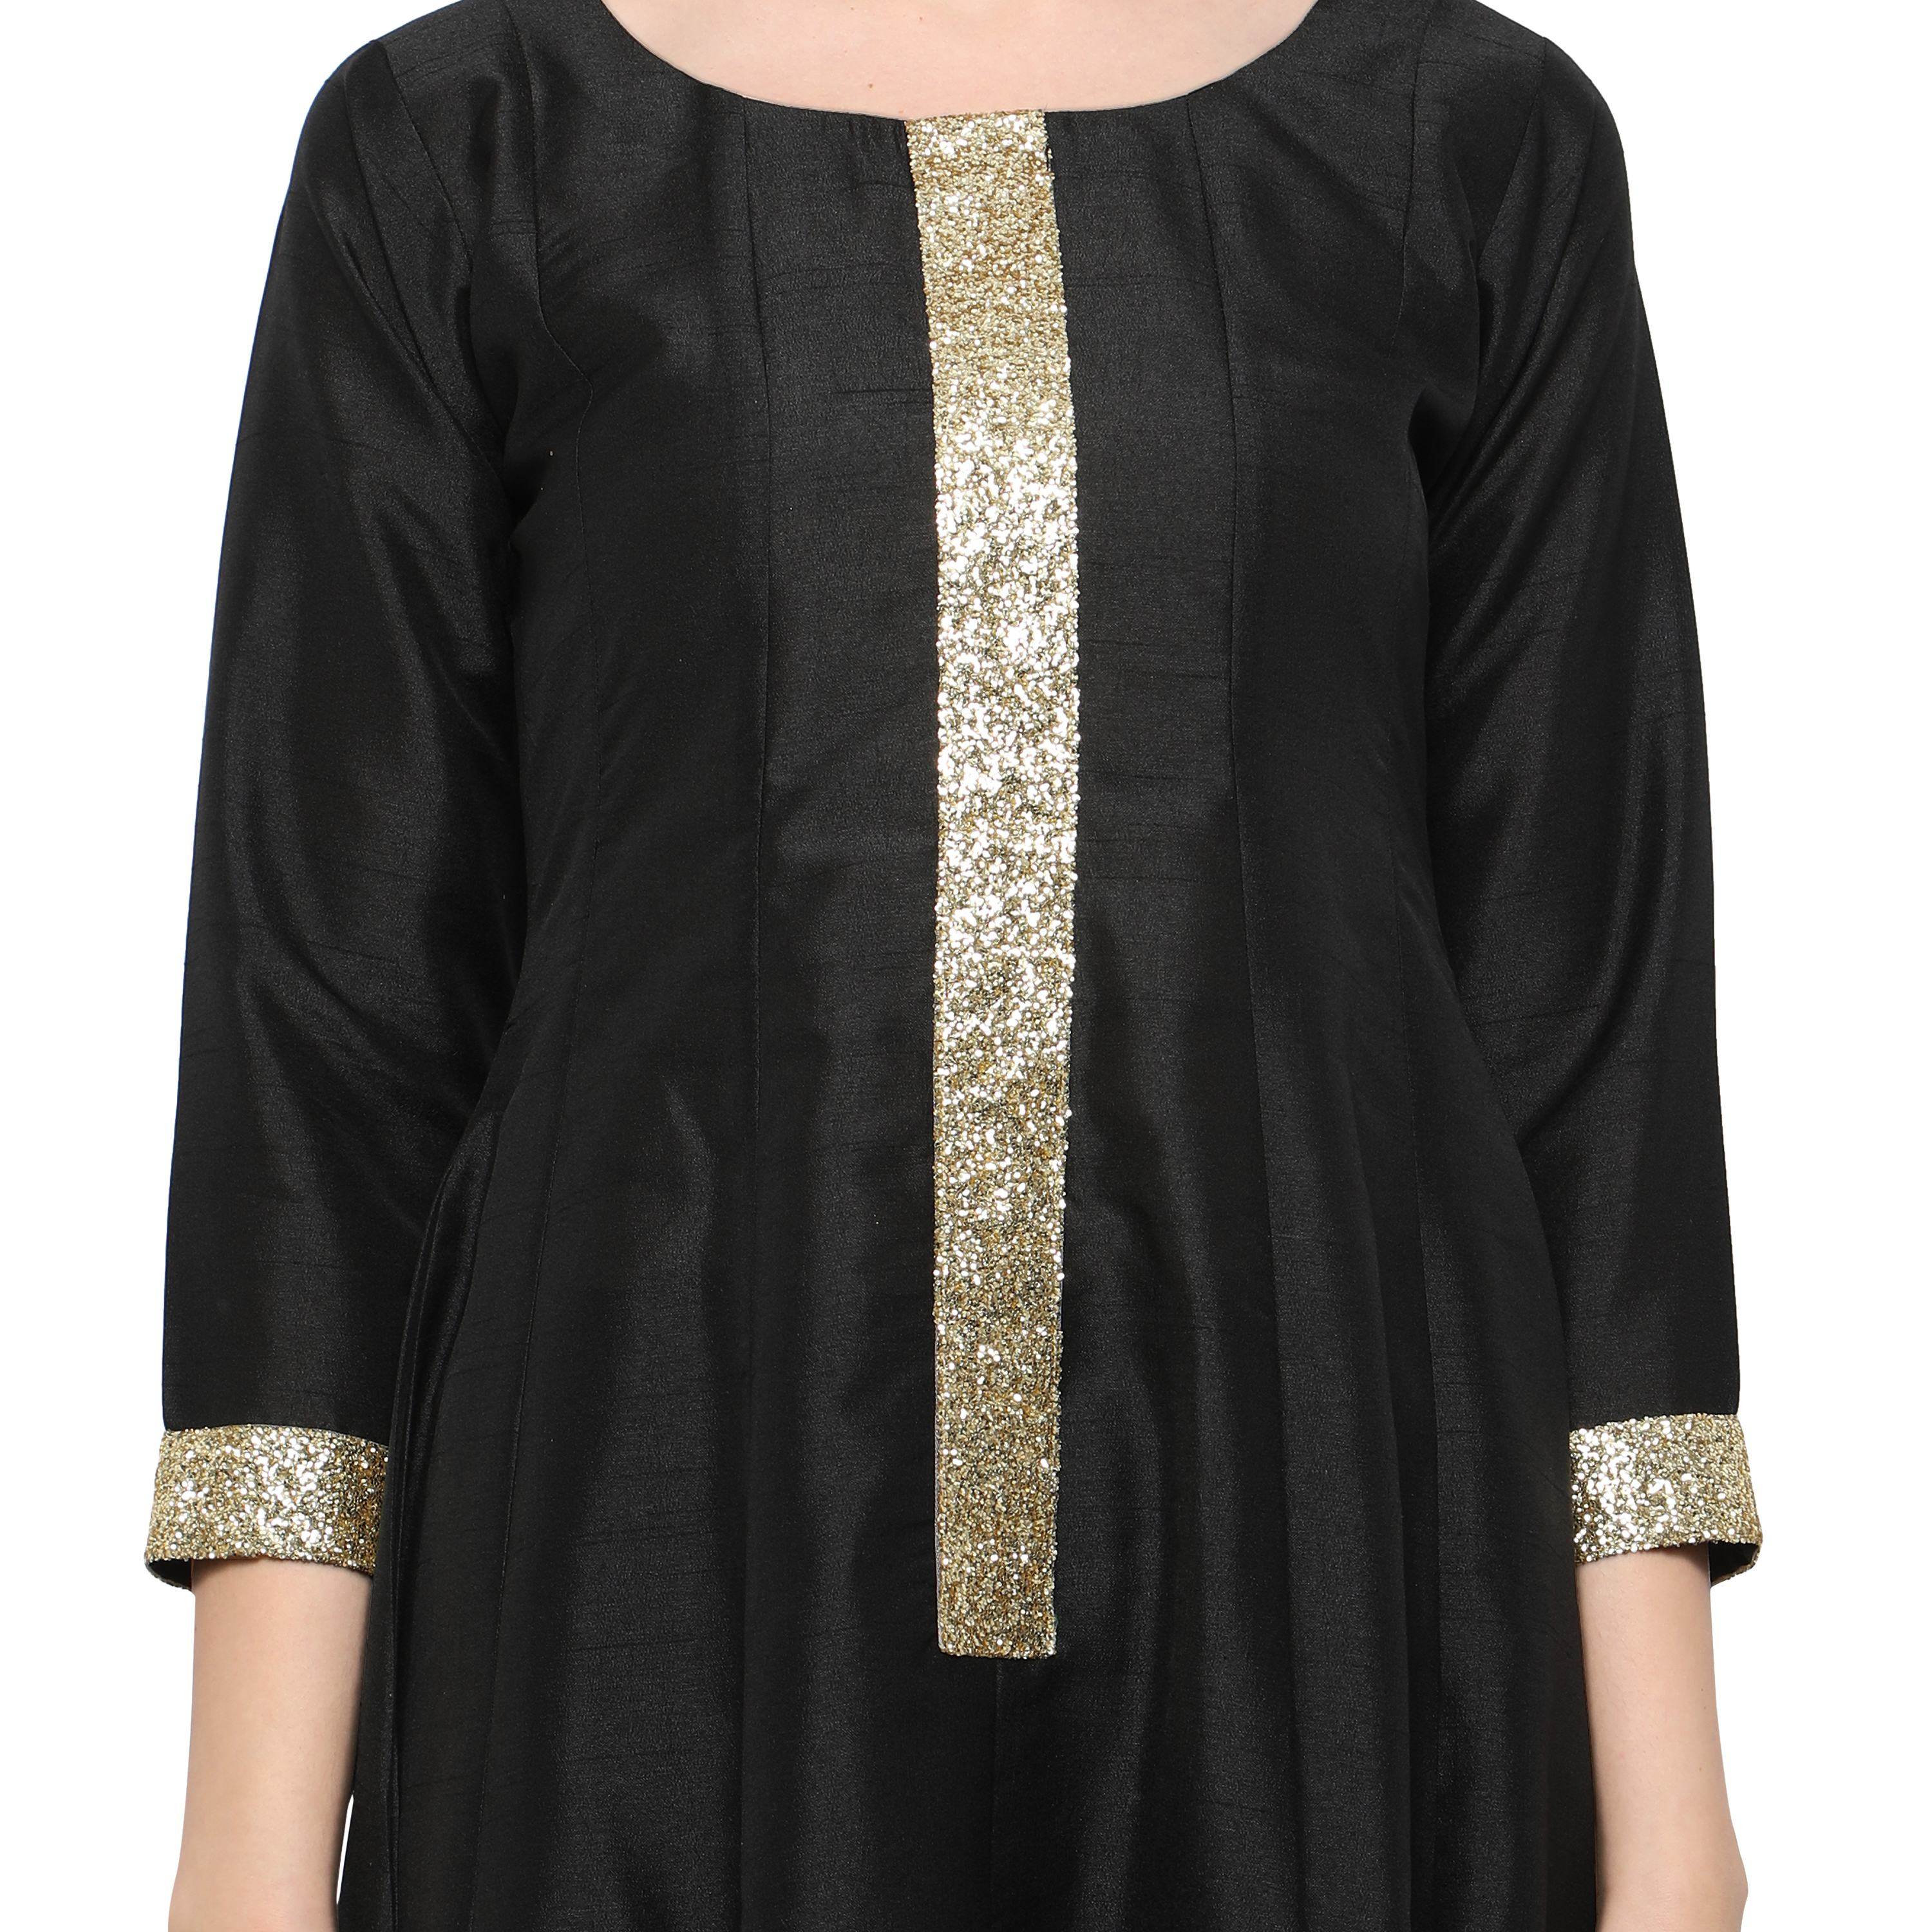 Women's Women's Black And Gold Anarkali Kurta Only For Festive And Party Wear - Ahalyaa